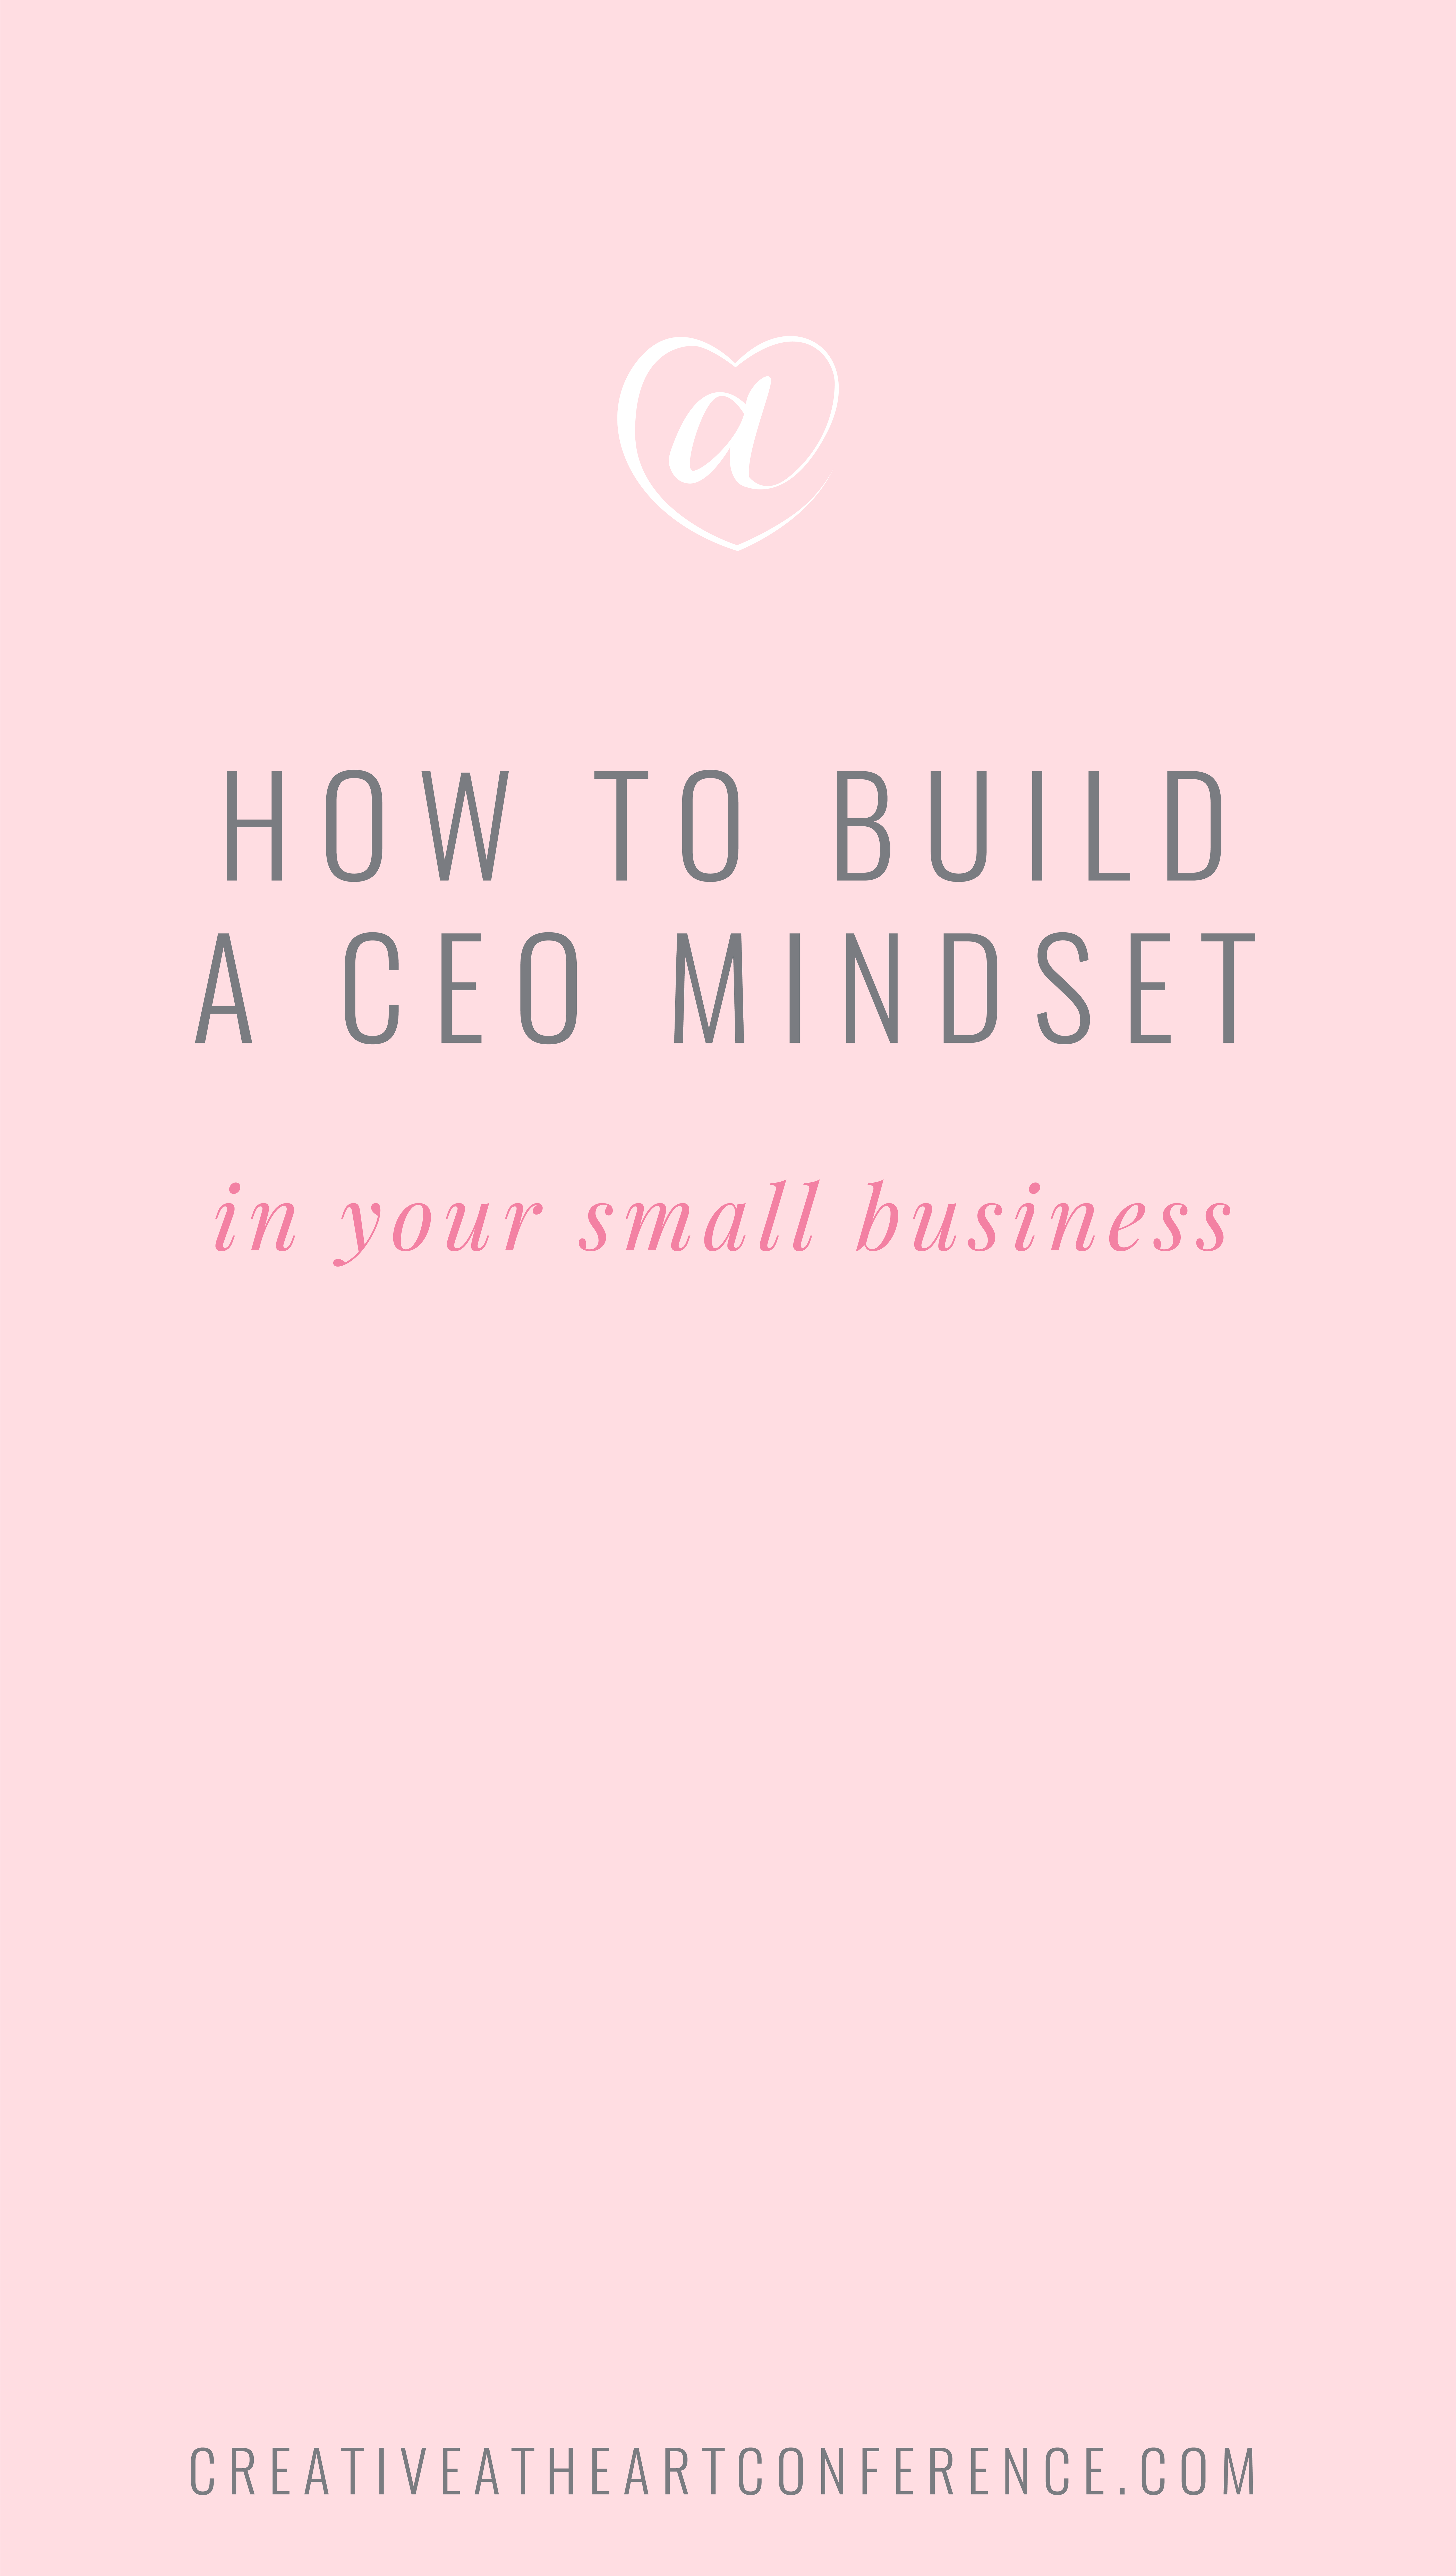 How to Build a CEO Mindset // Creative at Heart #teambuilding #leadership #creativeatheart #smallbusiness #outsourcing #bosslady #ceo